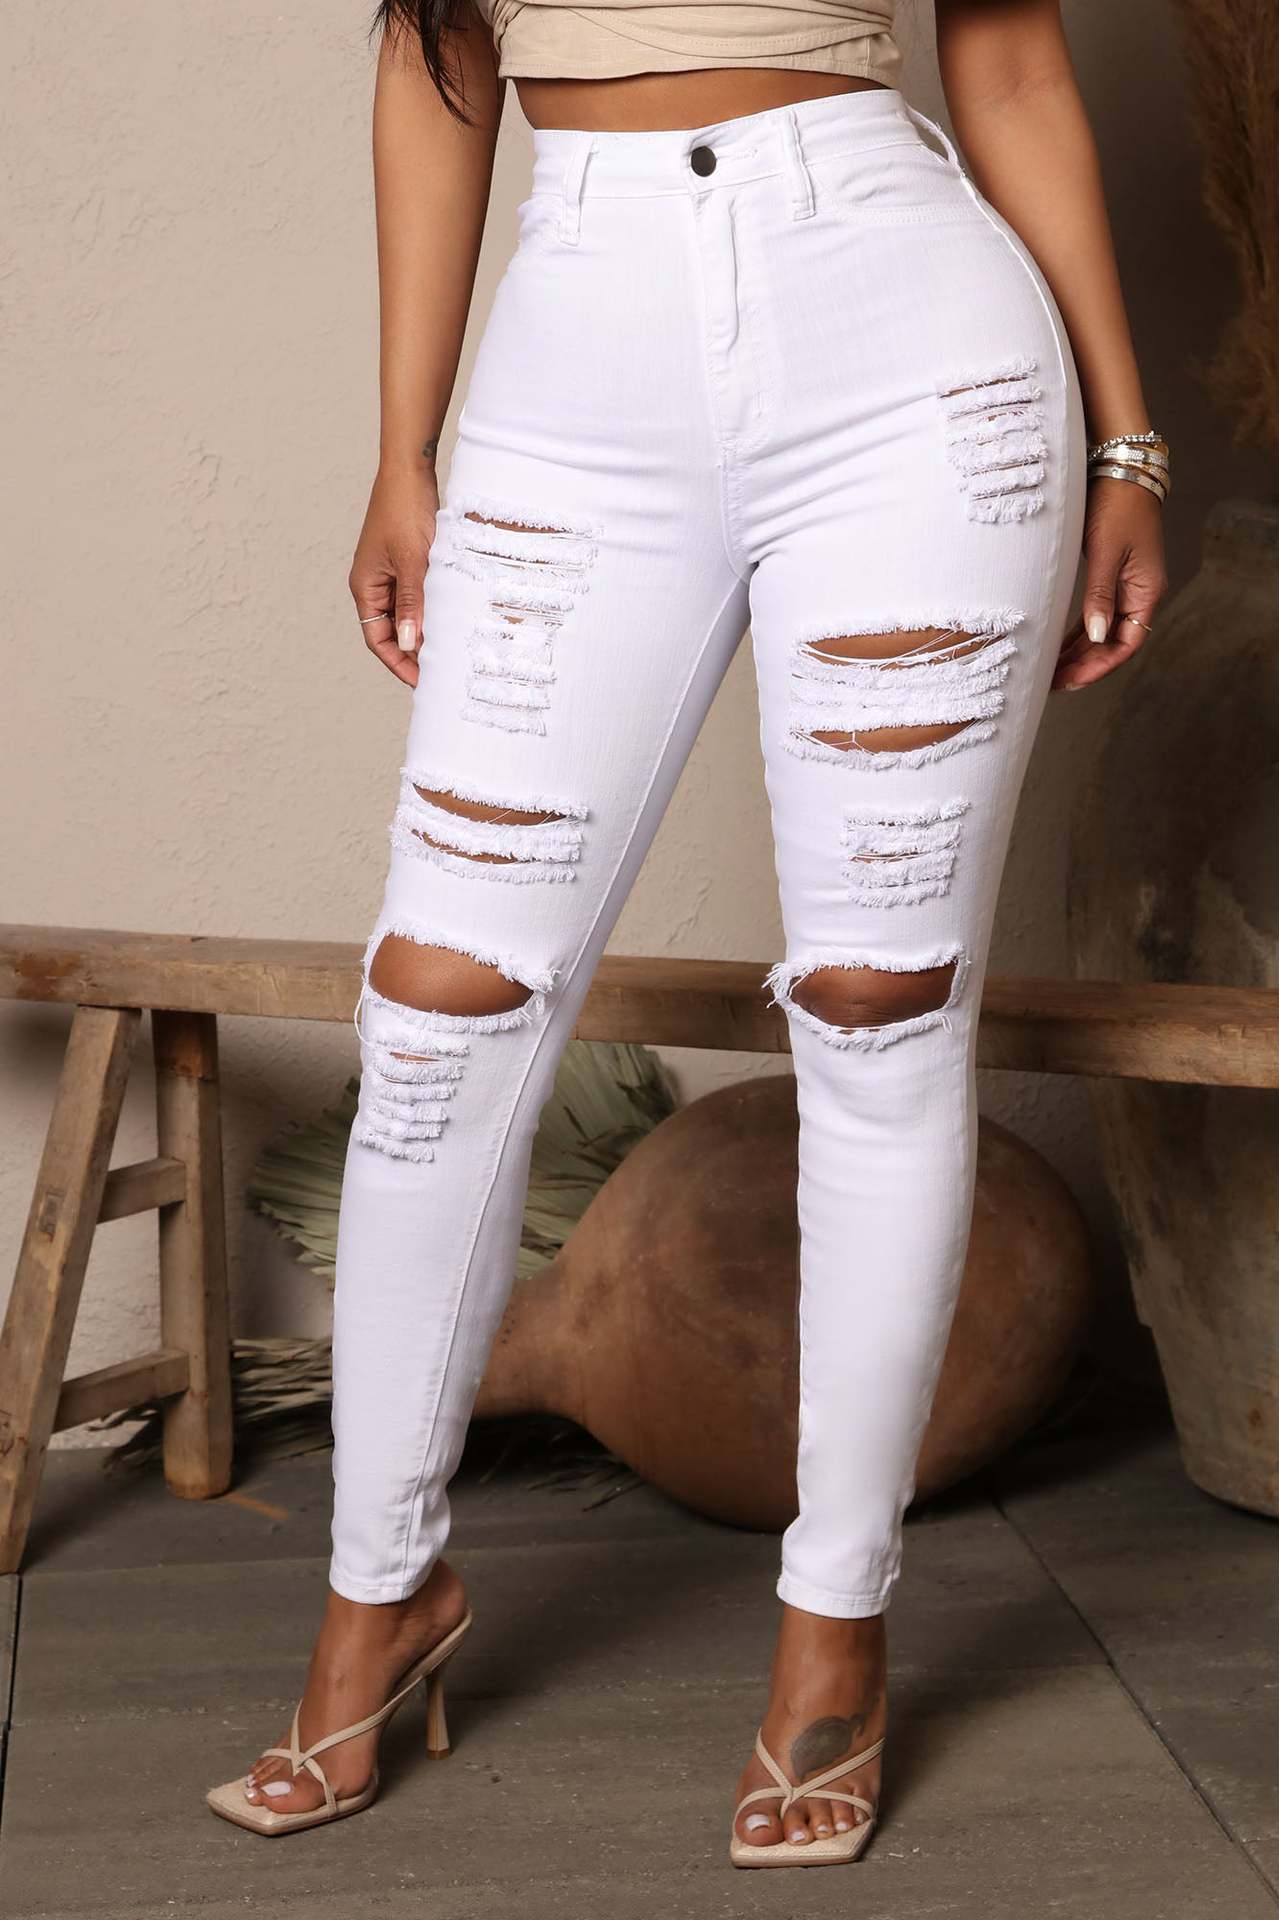 Stretch Ripped Jeans Women's